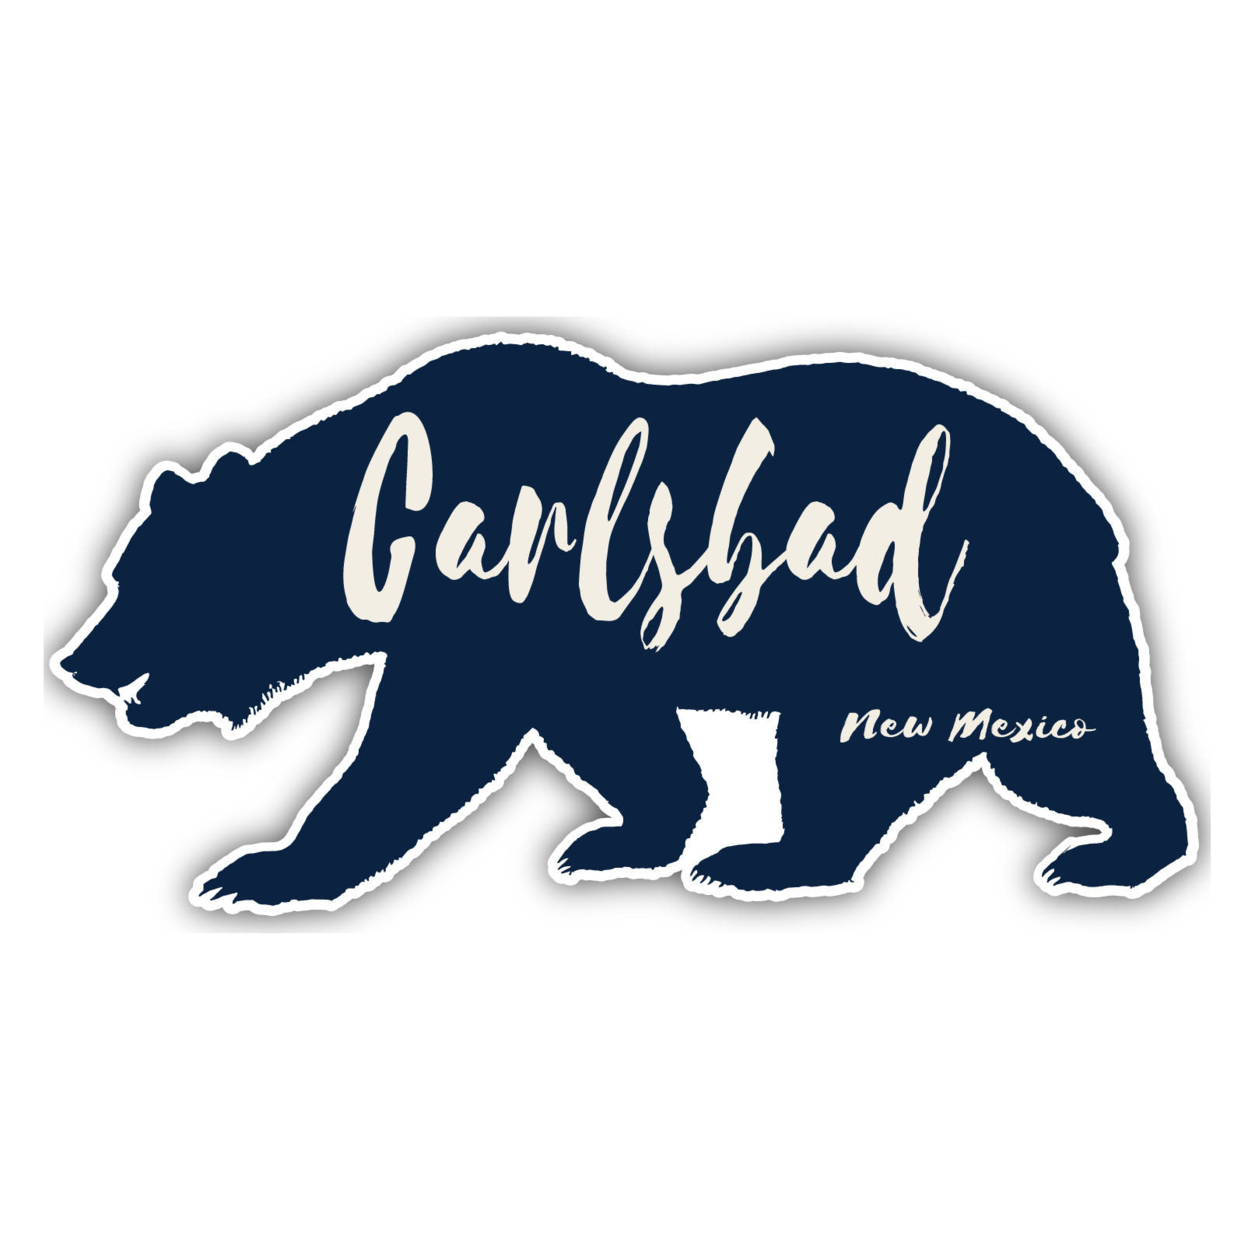 Carlsbad New Mexico Souvenir Decorative Stickers (Choose Theme And Size) - Single Unit, 4-Inch, Great Outdoors